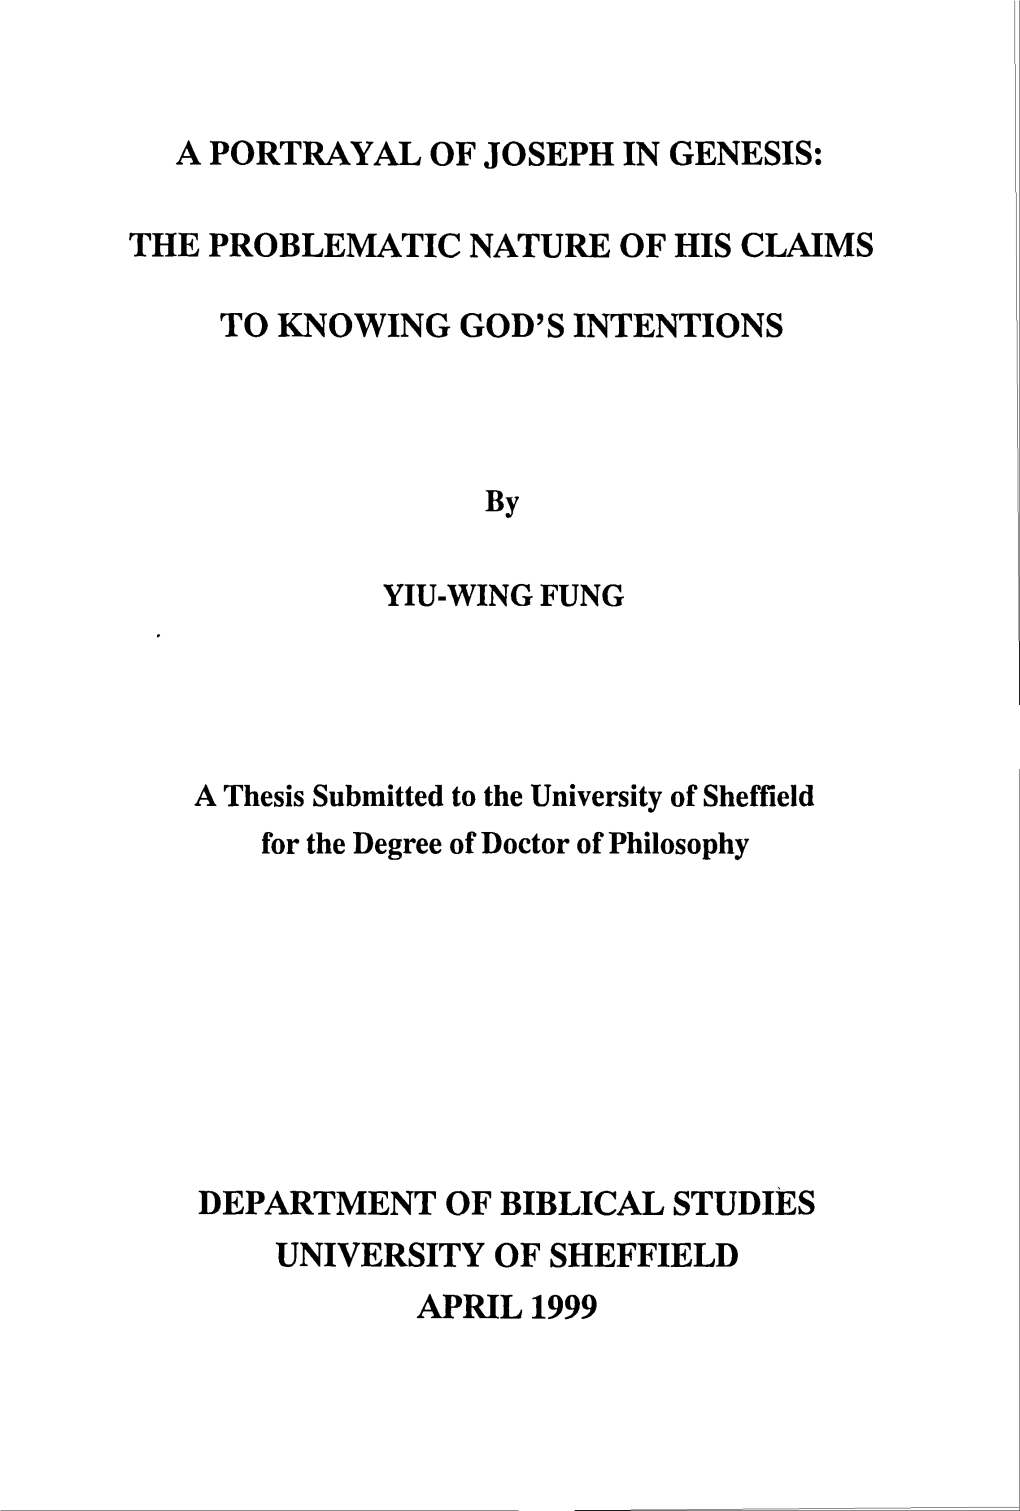 YIU-WING FUNG a Thesis Submitted to the University of Sheffield for The